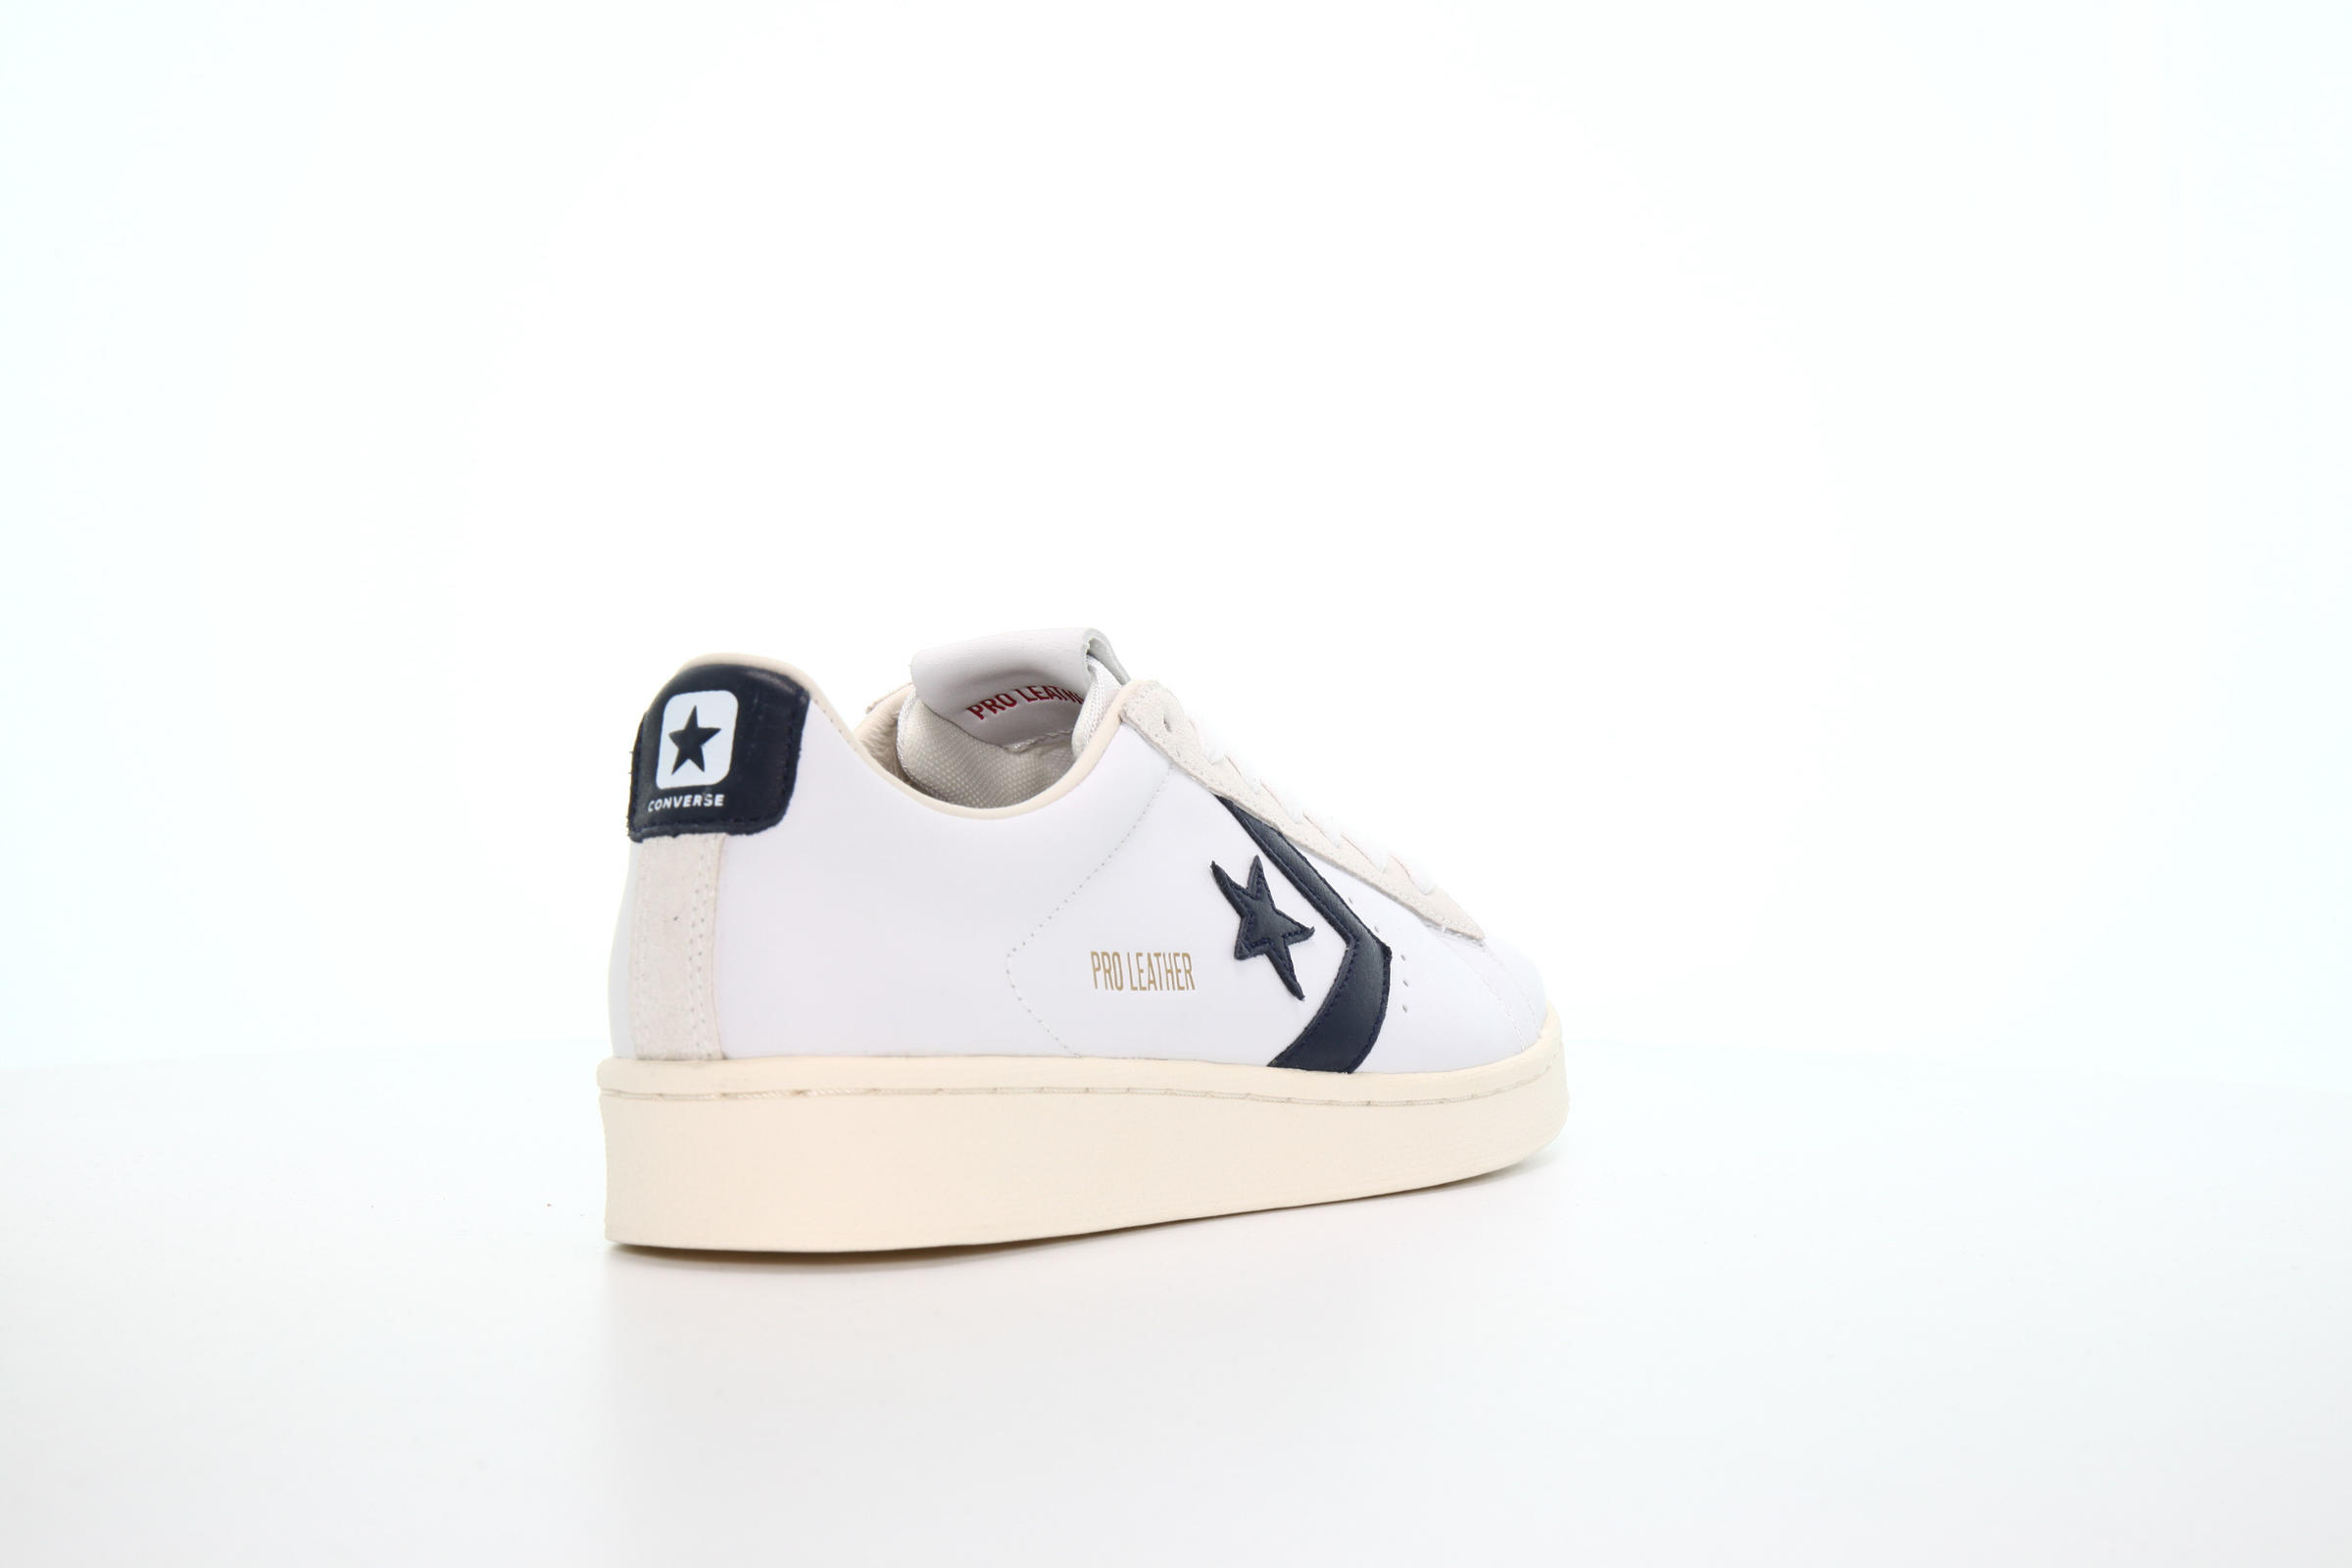 Converse PRO LEATHER OG OX "WHITE"